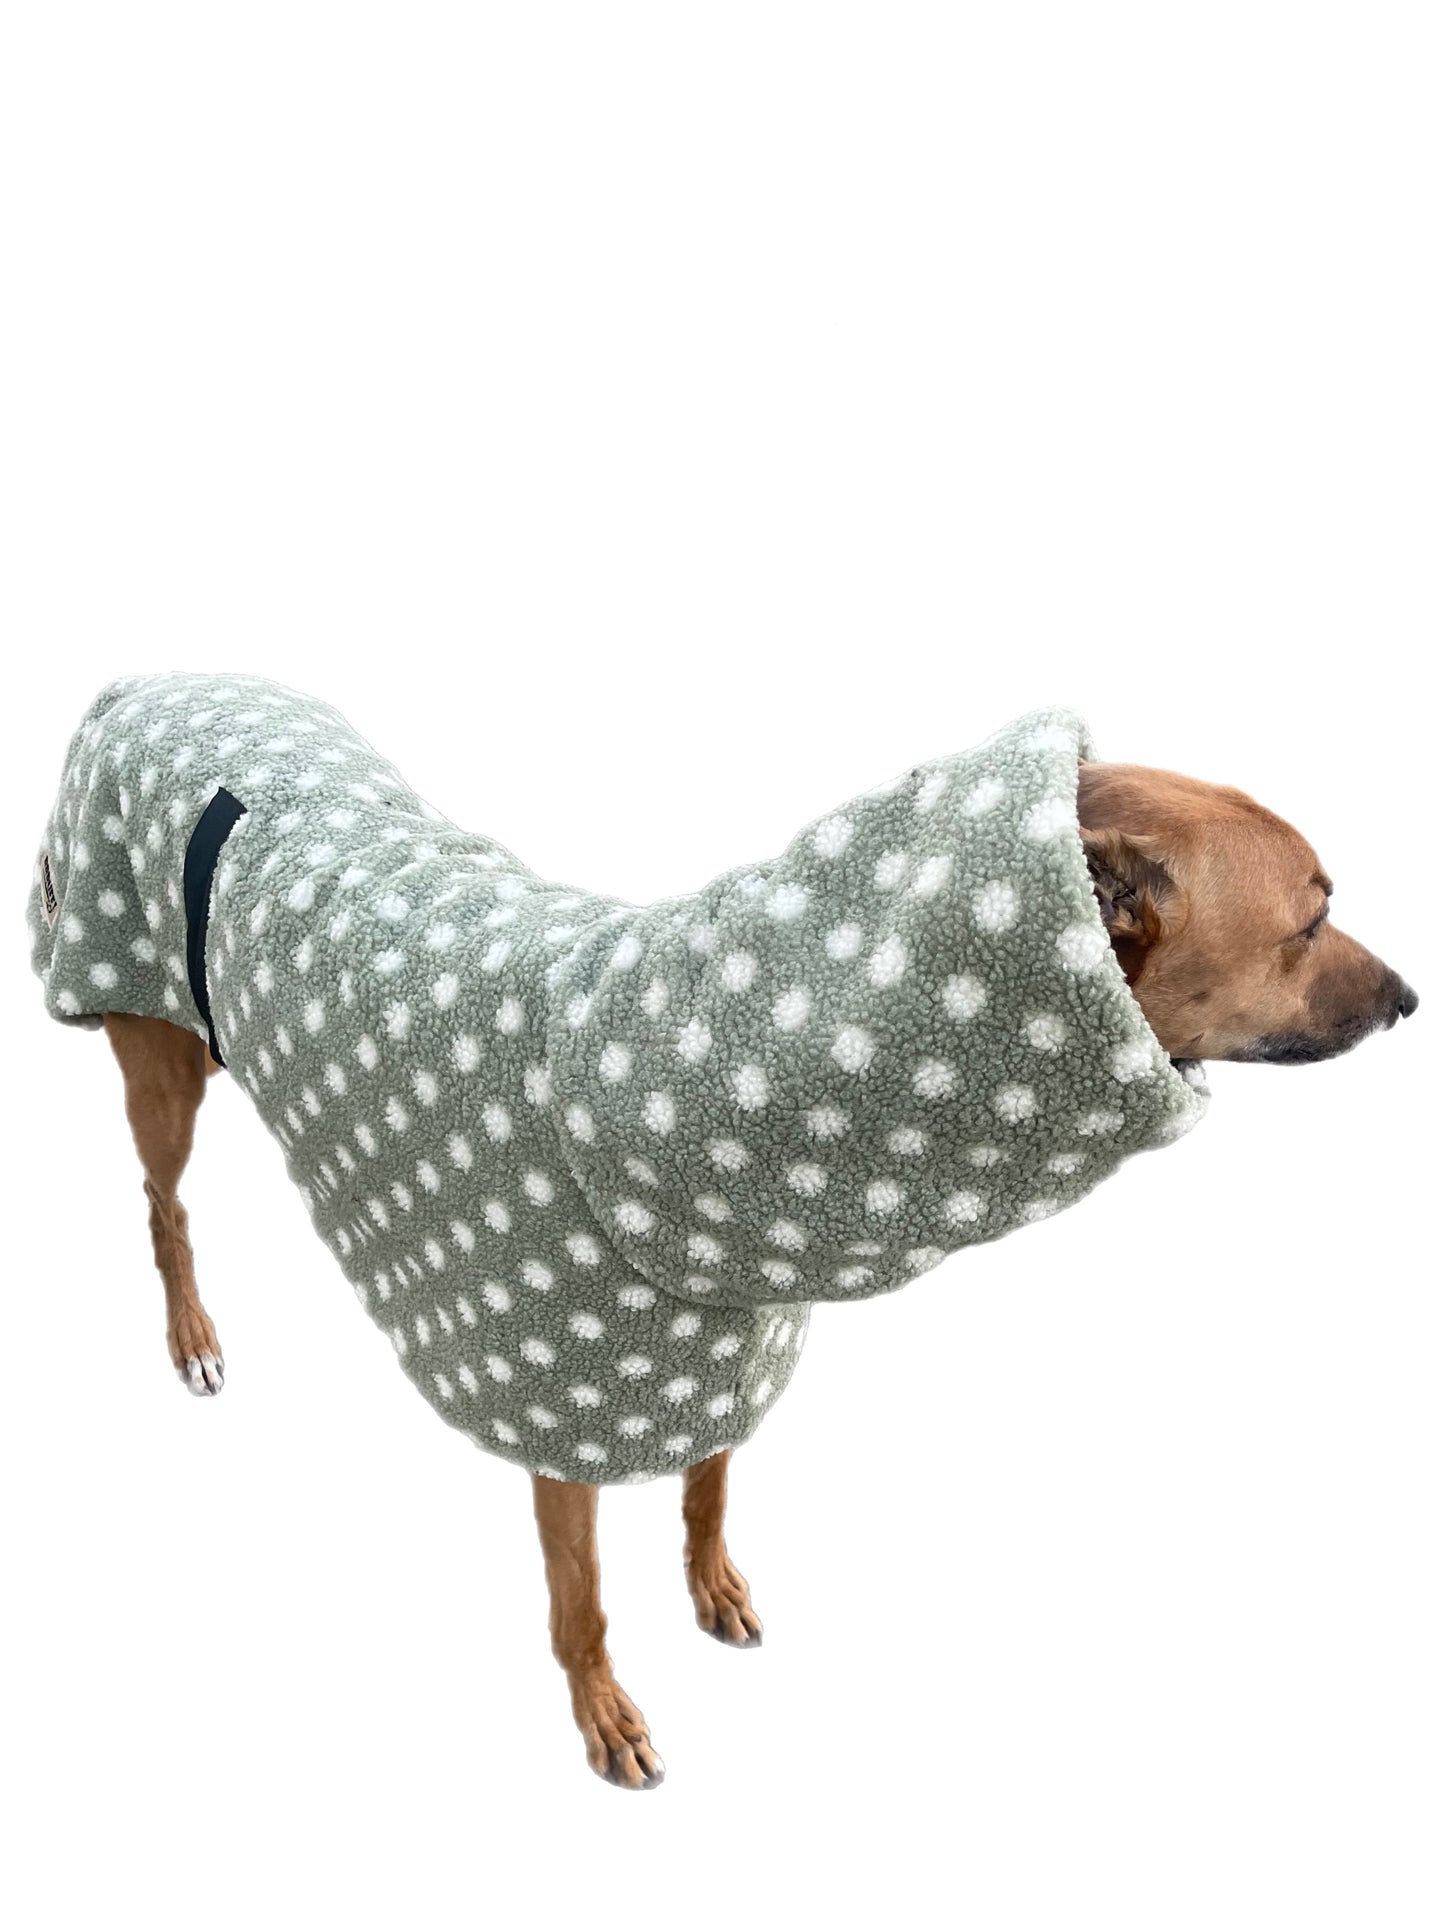 Sage Polka dot print Teddy fleece deluxe style greyhound coat with snuggly wide neck roll